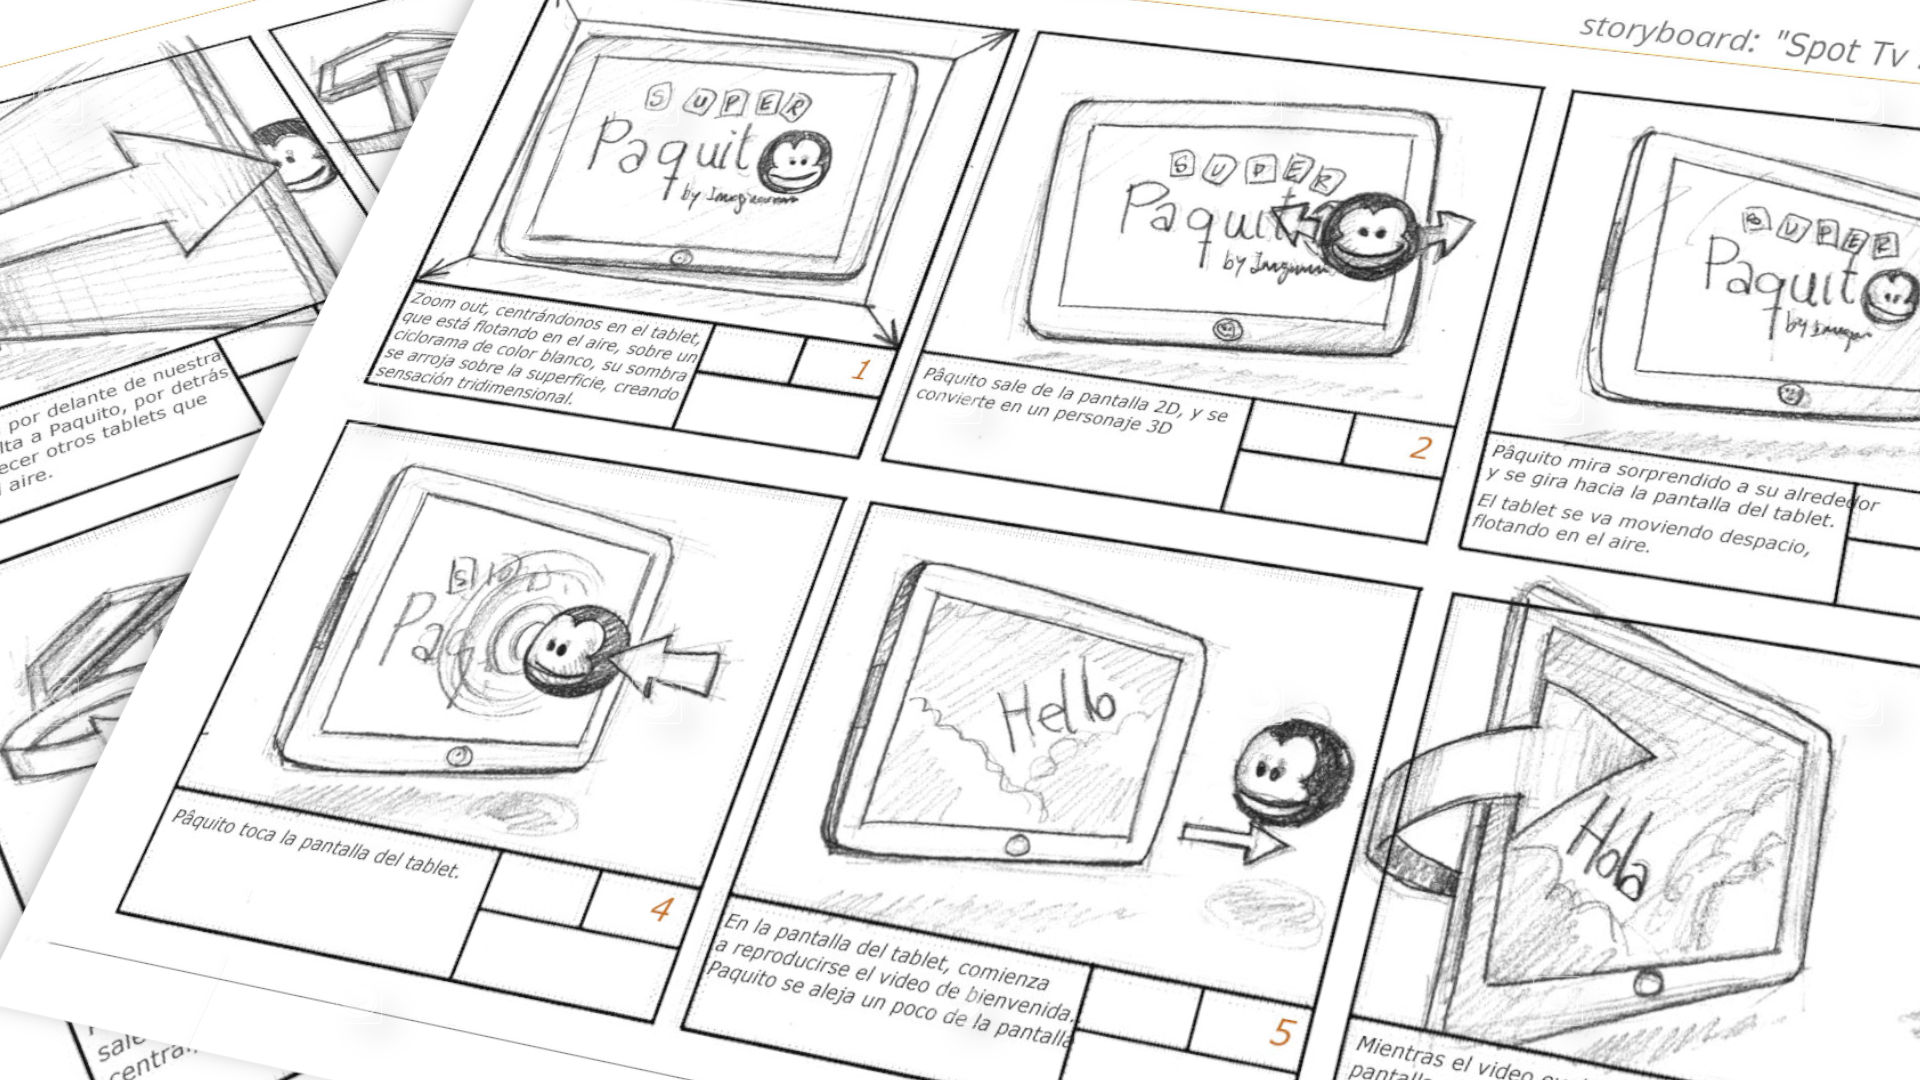 Detail of the storyboard made for this Imaginarium TV commercial